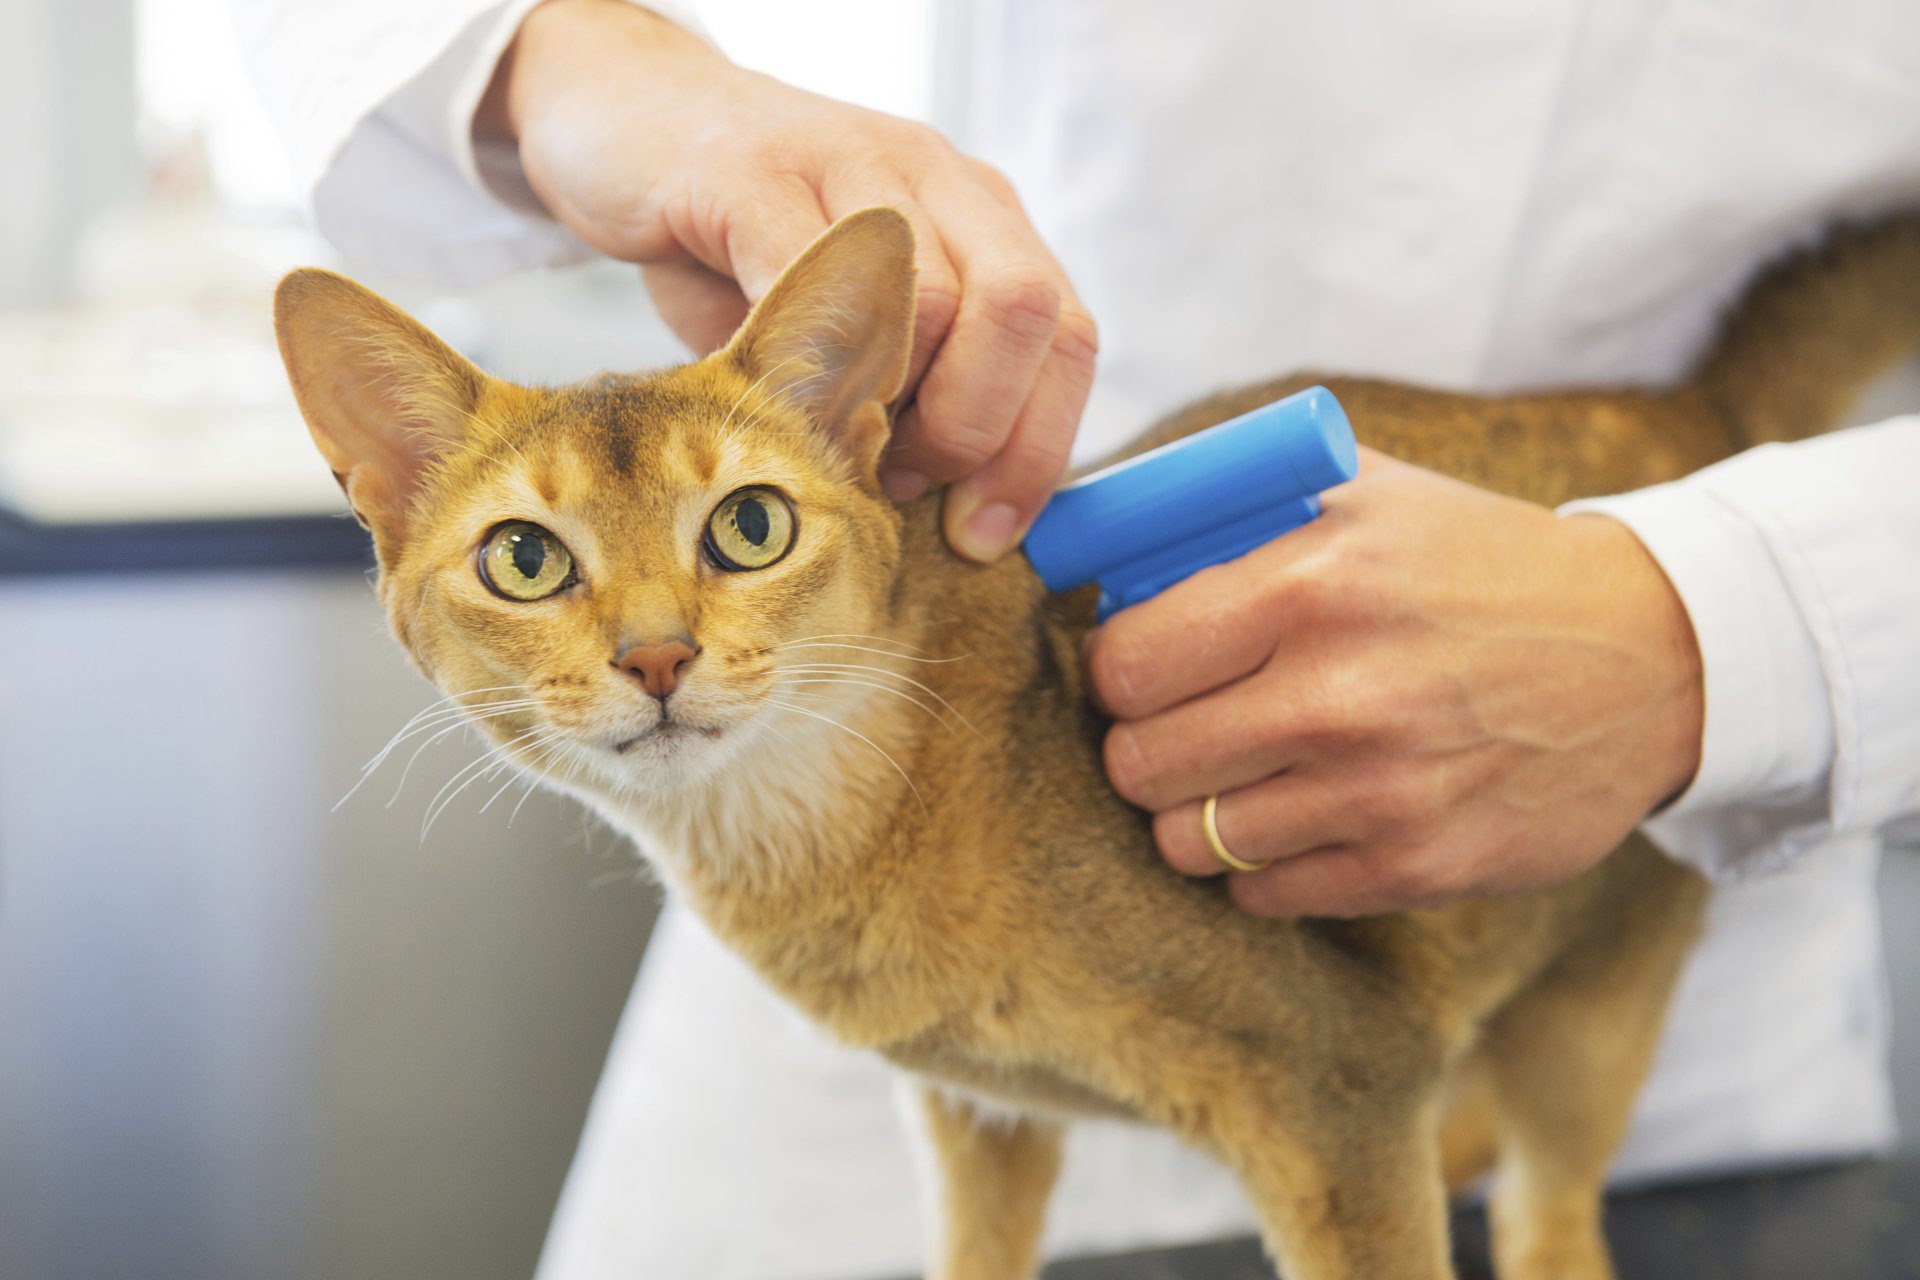 Veterinarian Implanted a microchip to the cat